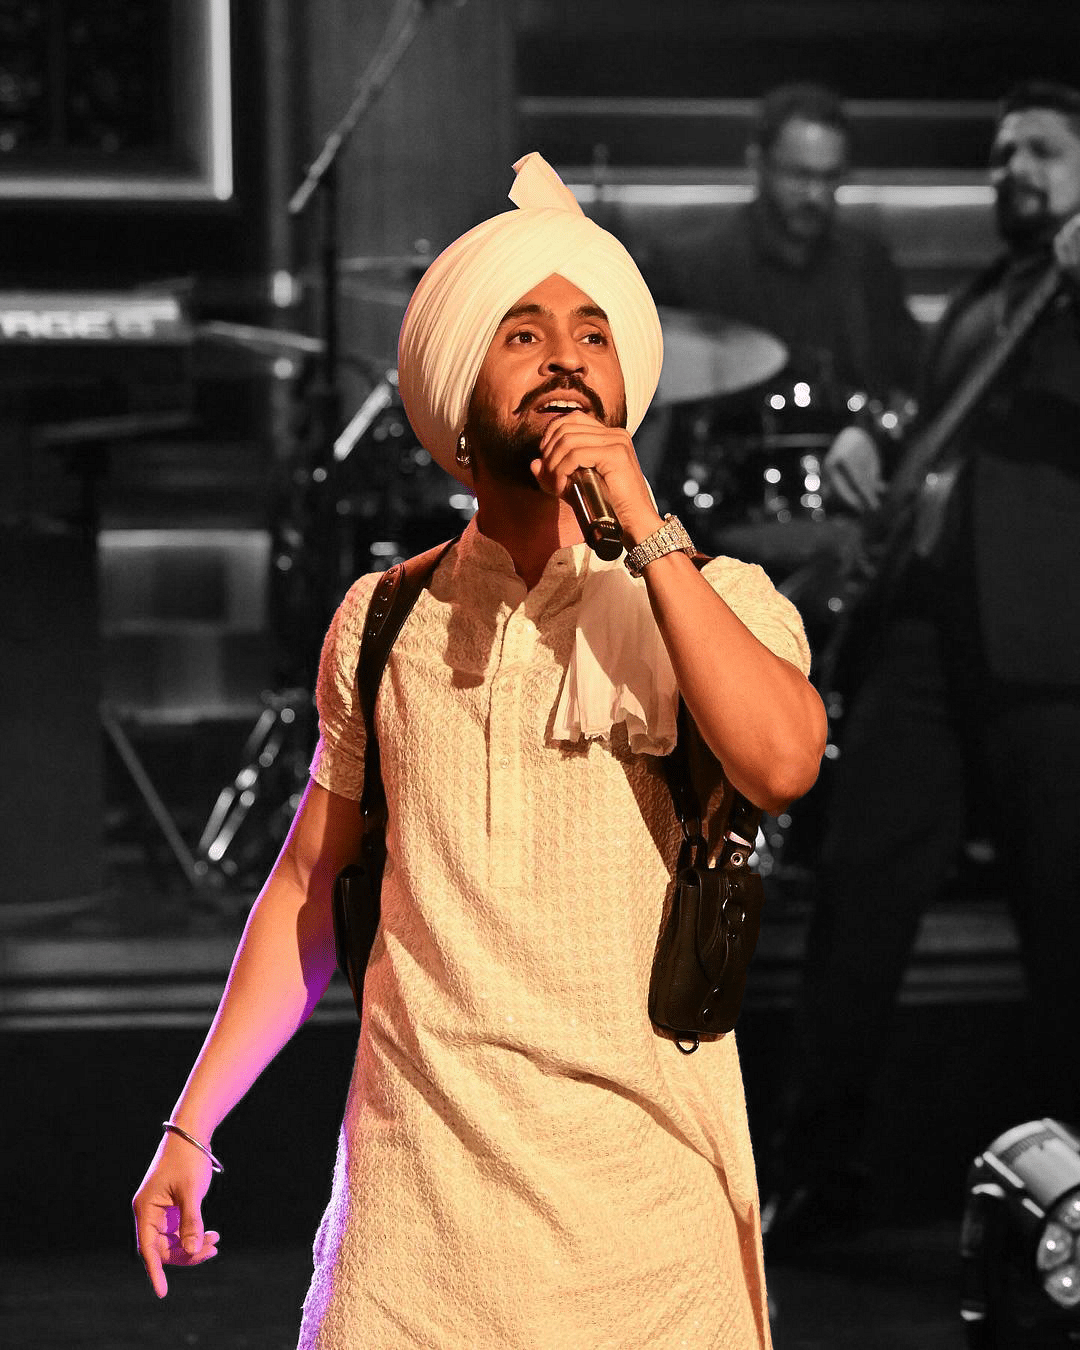 Diljit Dosanjh has never shied away from admitting that representation – for India, for Punjab – is crucial to him.